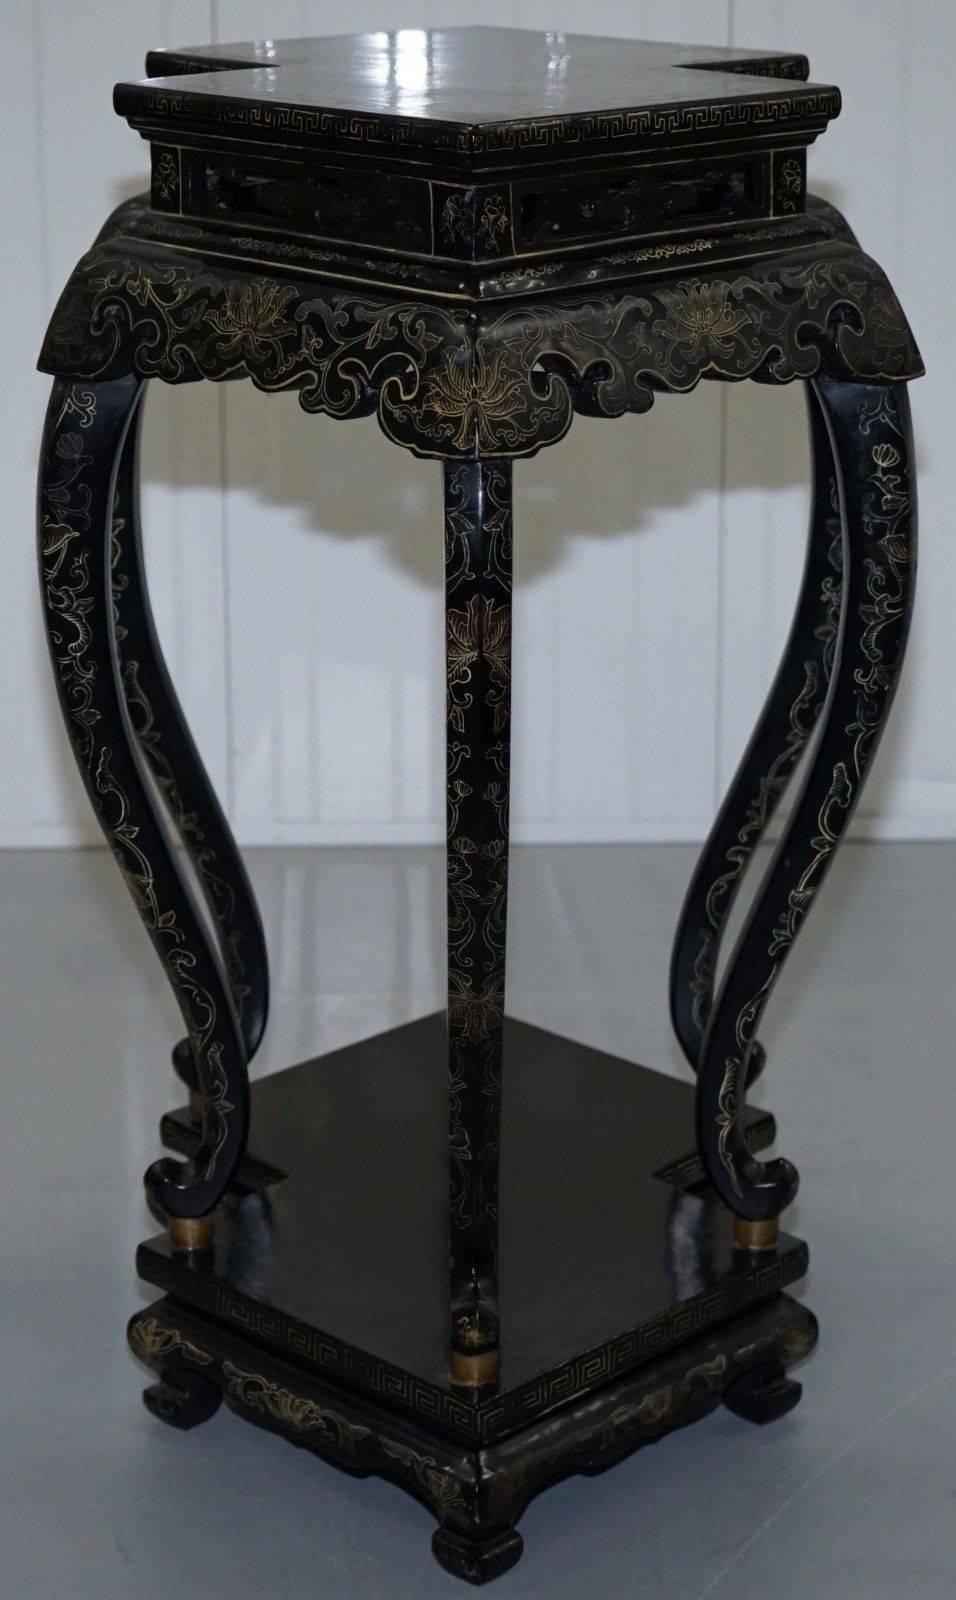 Hand-Crafted Hand-Painted 19th Century Chinese Chinoiserie Lacquered Jardinière Plant Stand